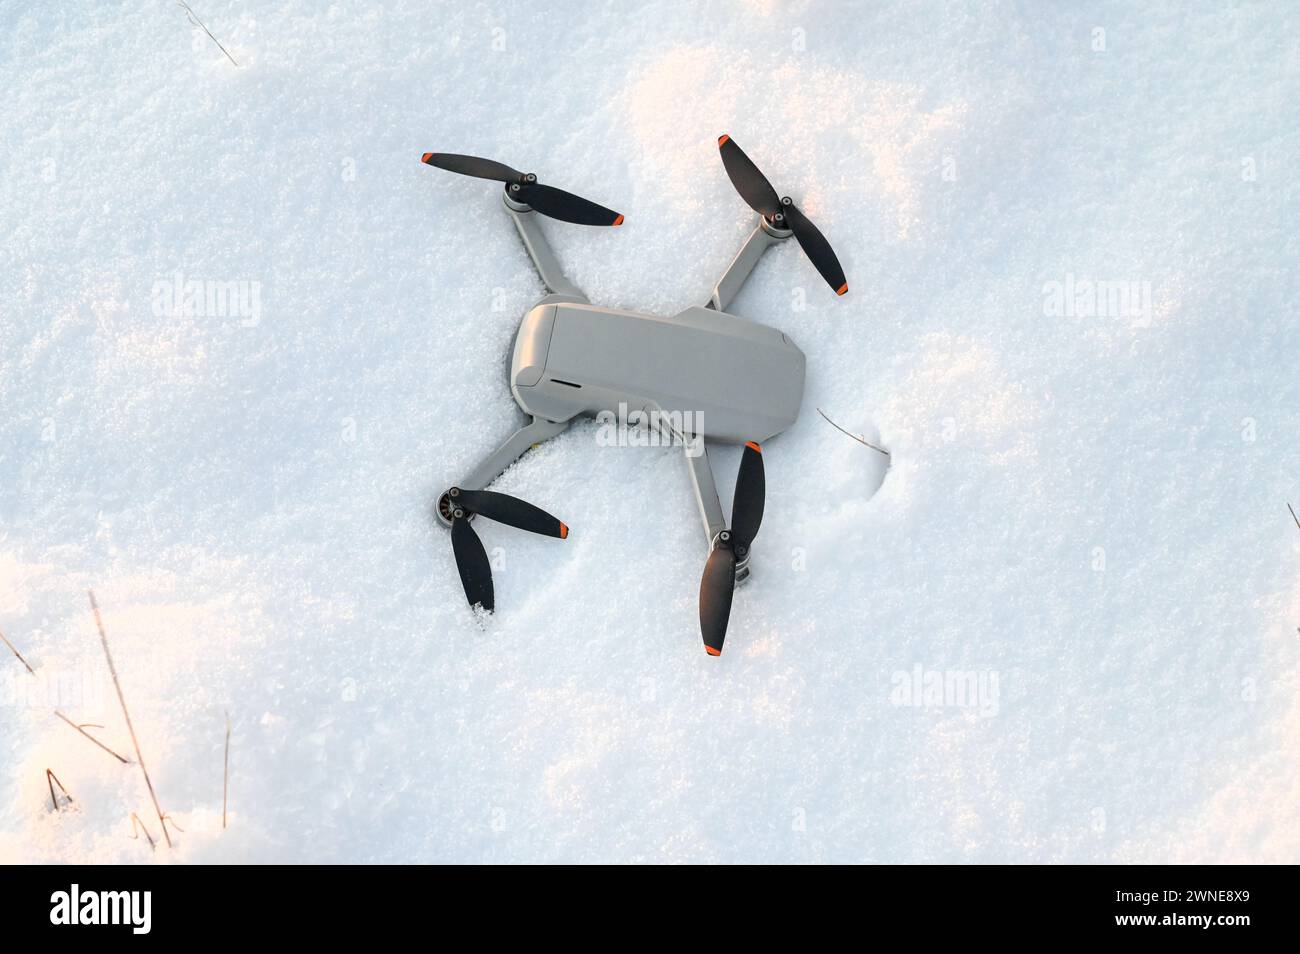 A drone lost in the snow. A drone that fell into the snow. Fail flight. Accident with a drone. Stock Photo